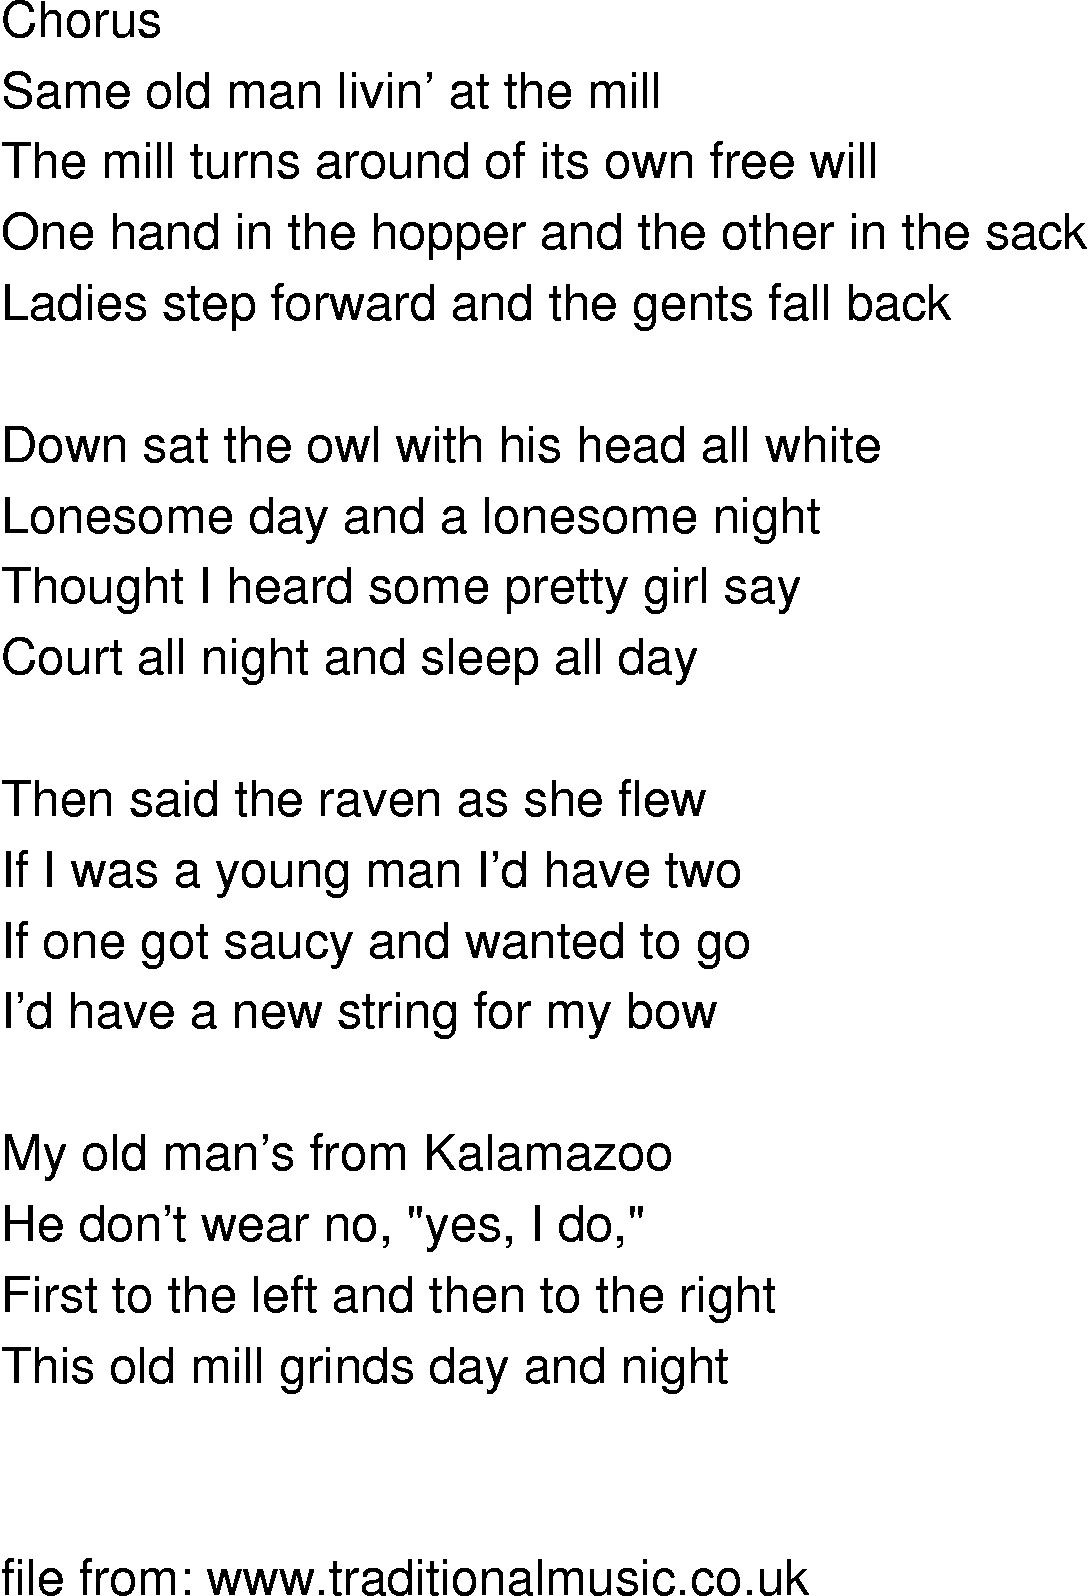 Old-Time (oldtimey) Song Lyrics - old man at the mill